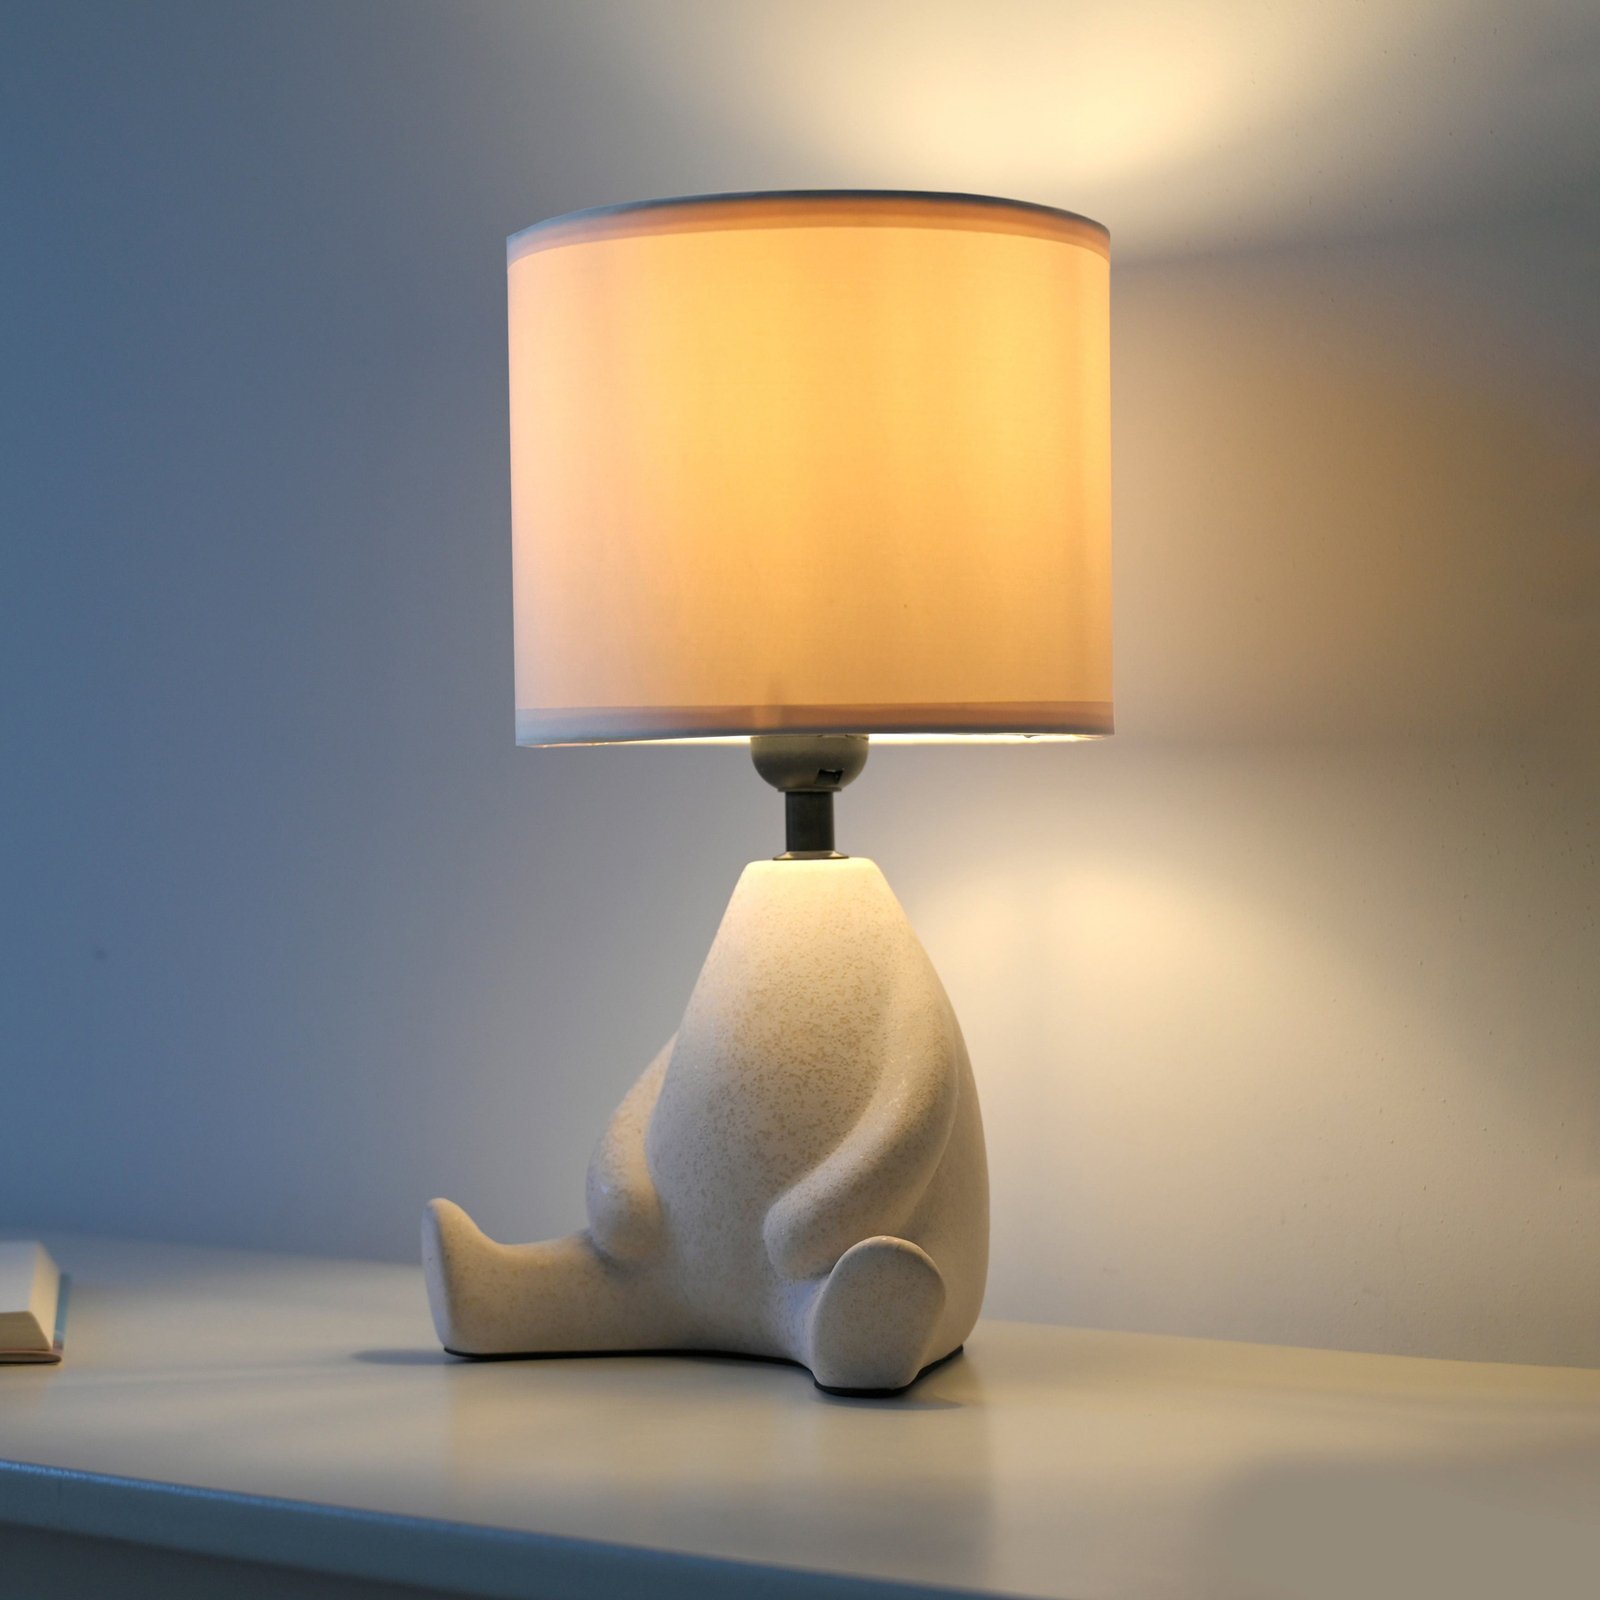 JUST LIGHT. Ted table lamp, ceramic, seated, sand beige